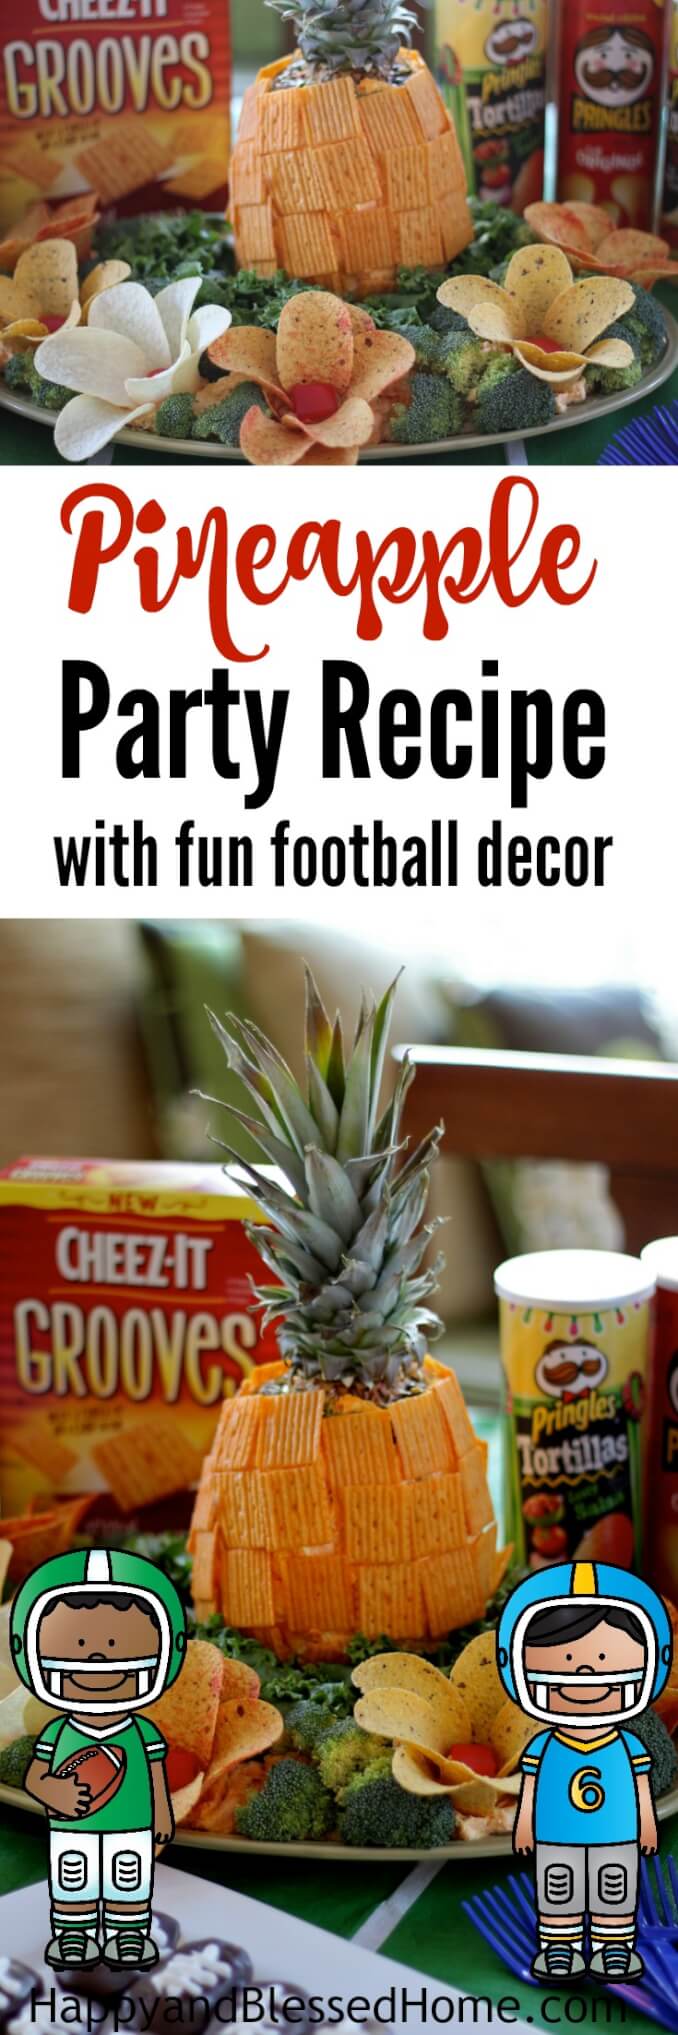 Football Party ideas including an awesome Pineapple Party Recipe, football cookies, tips for making memories and easy cleanup. Plus, FREE football party printables!